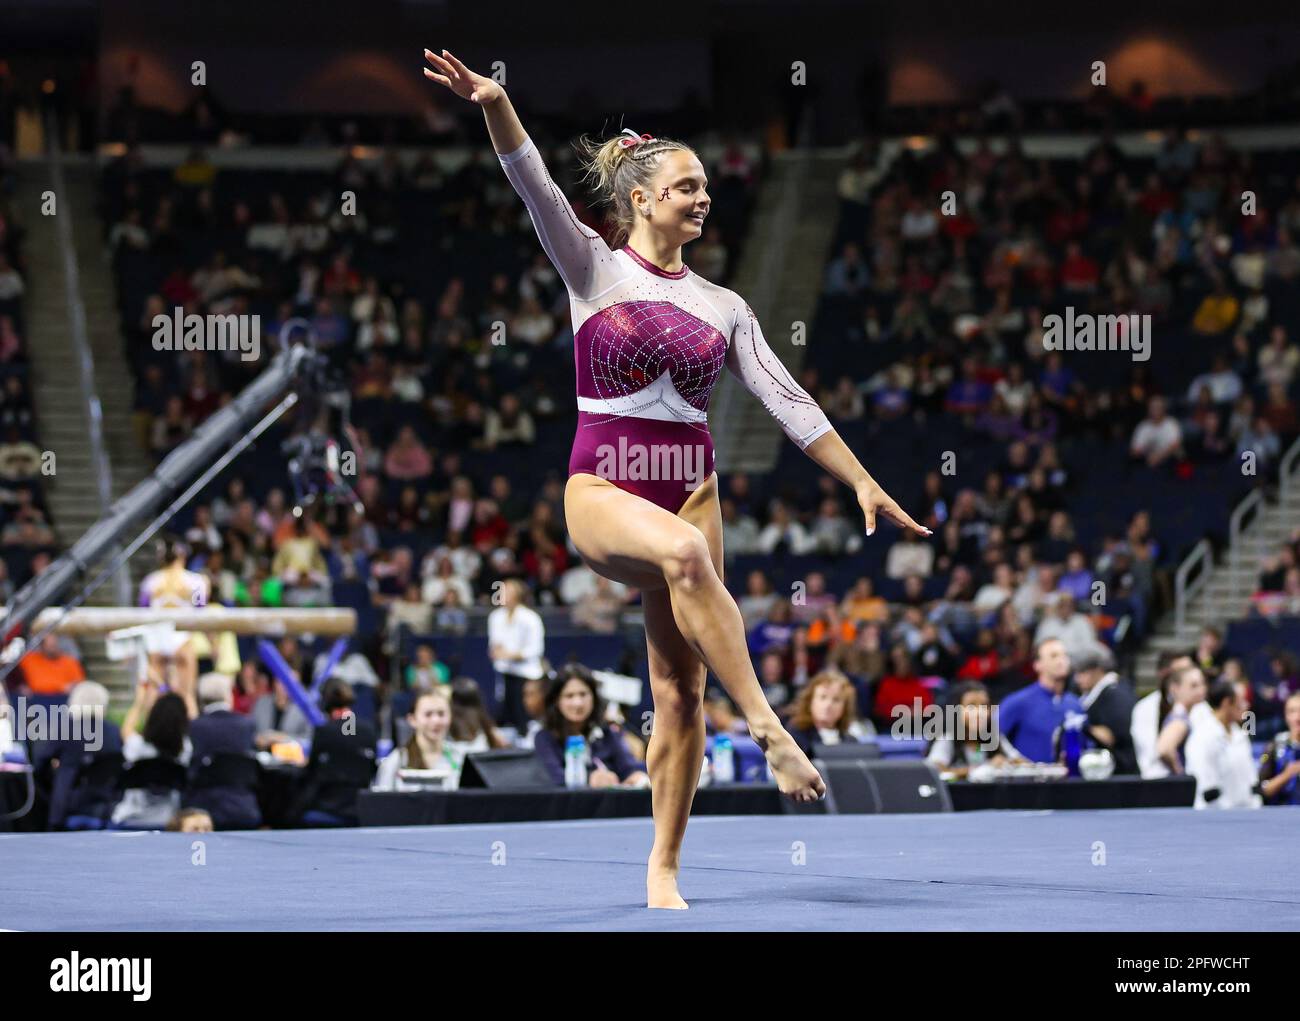 March 18, 2023: Alabama's Lilly Hudson competes on the floor exercise ...